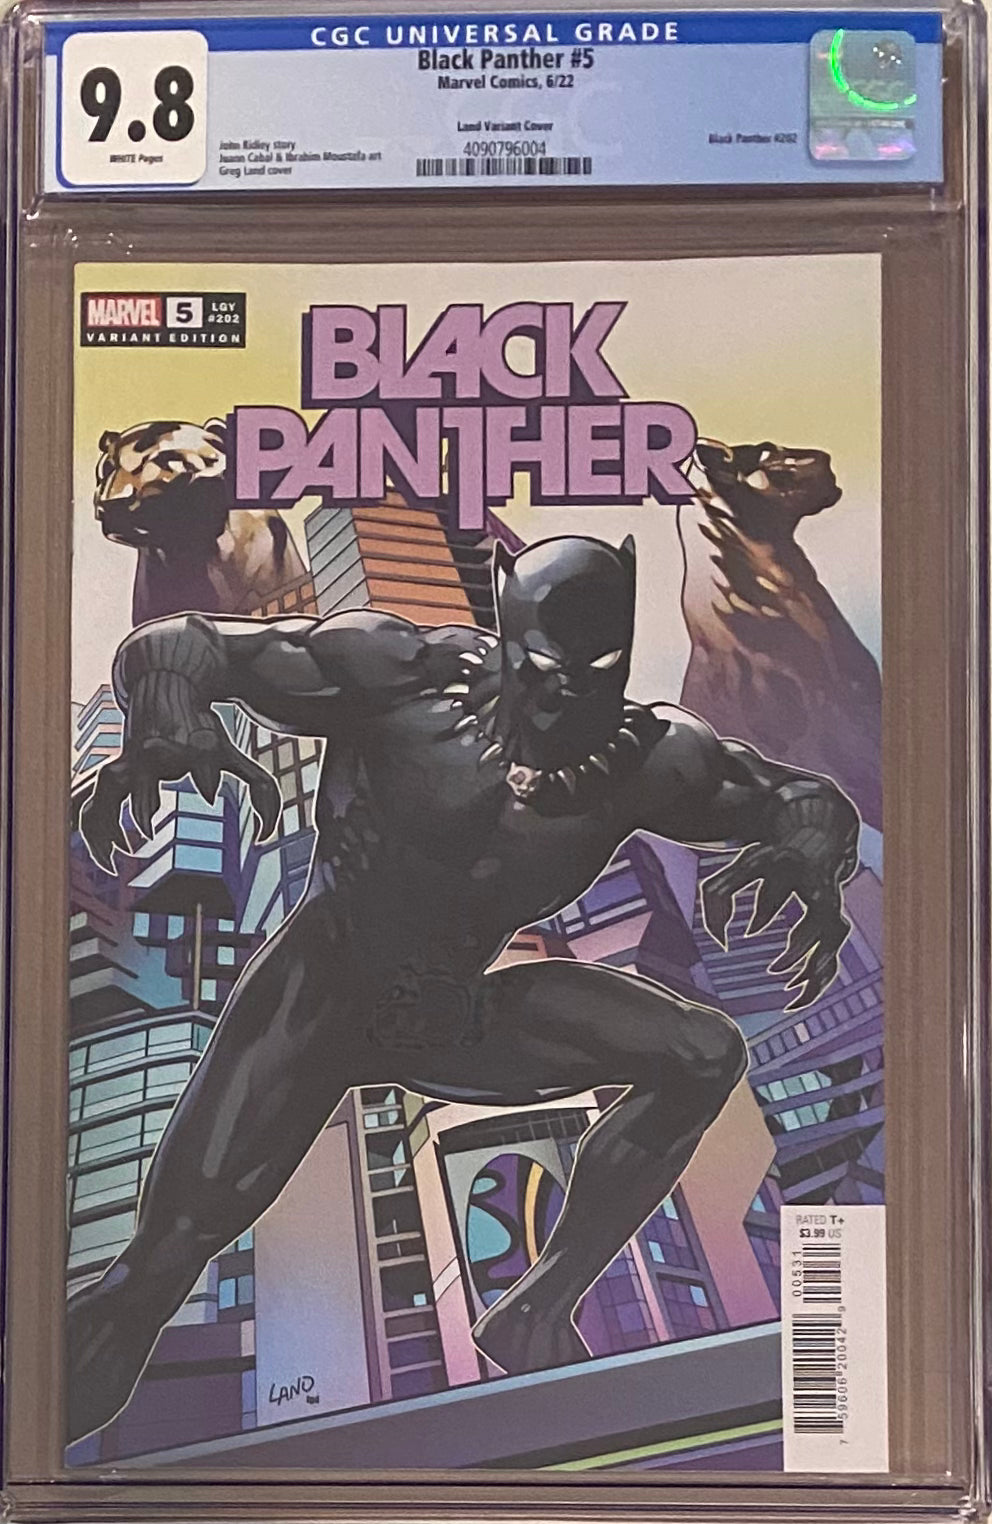 Black Panther #5 Land Variant CGC 9.8 - Second Appearance Tosin